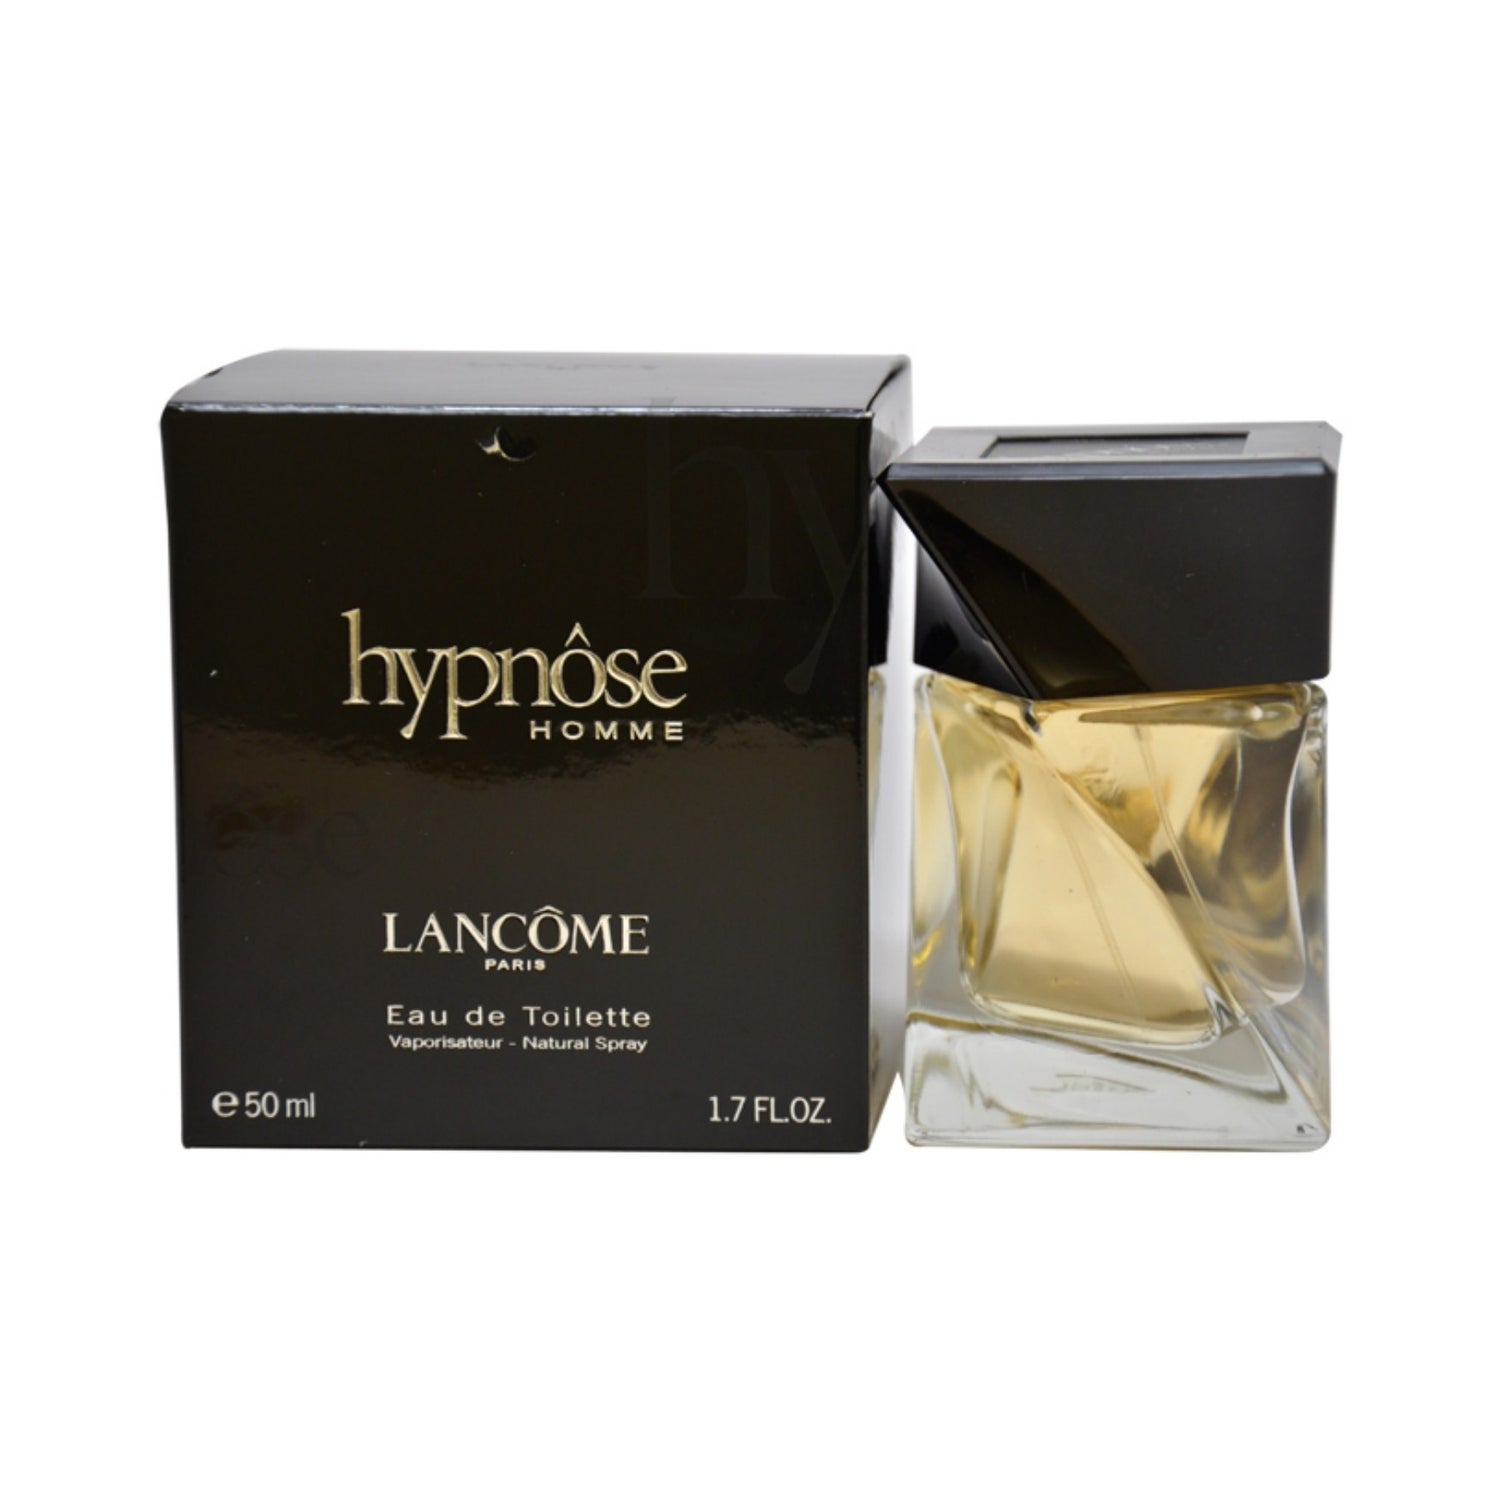 Hypnose homme. Lancome Hypnose homme 75ml. Hypnose Lancome мужской. Hypnose homme EDT 50ml. Lancome Hypnose homme набор.